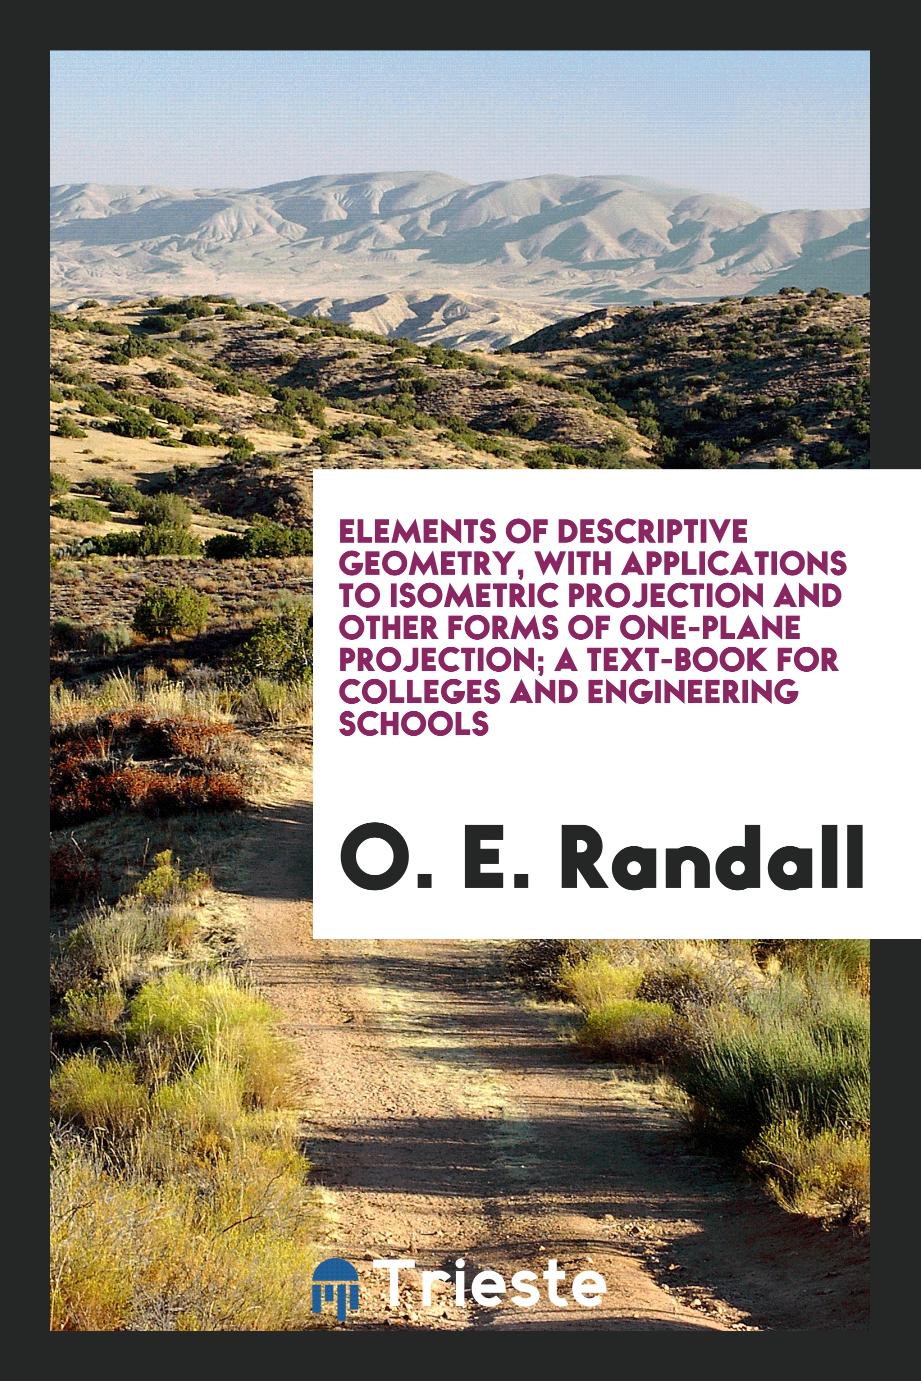 Elements of descriptive geometry, with applications to isometric projection and other forms of one-plane projection; a text-book for colleges and engineering schools